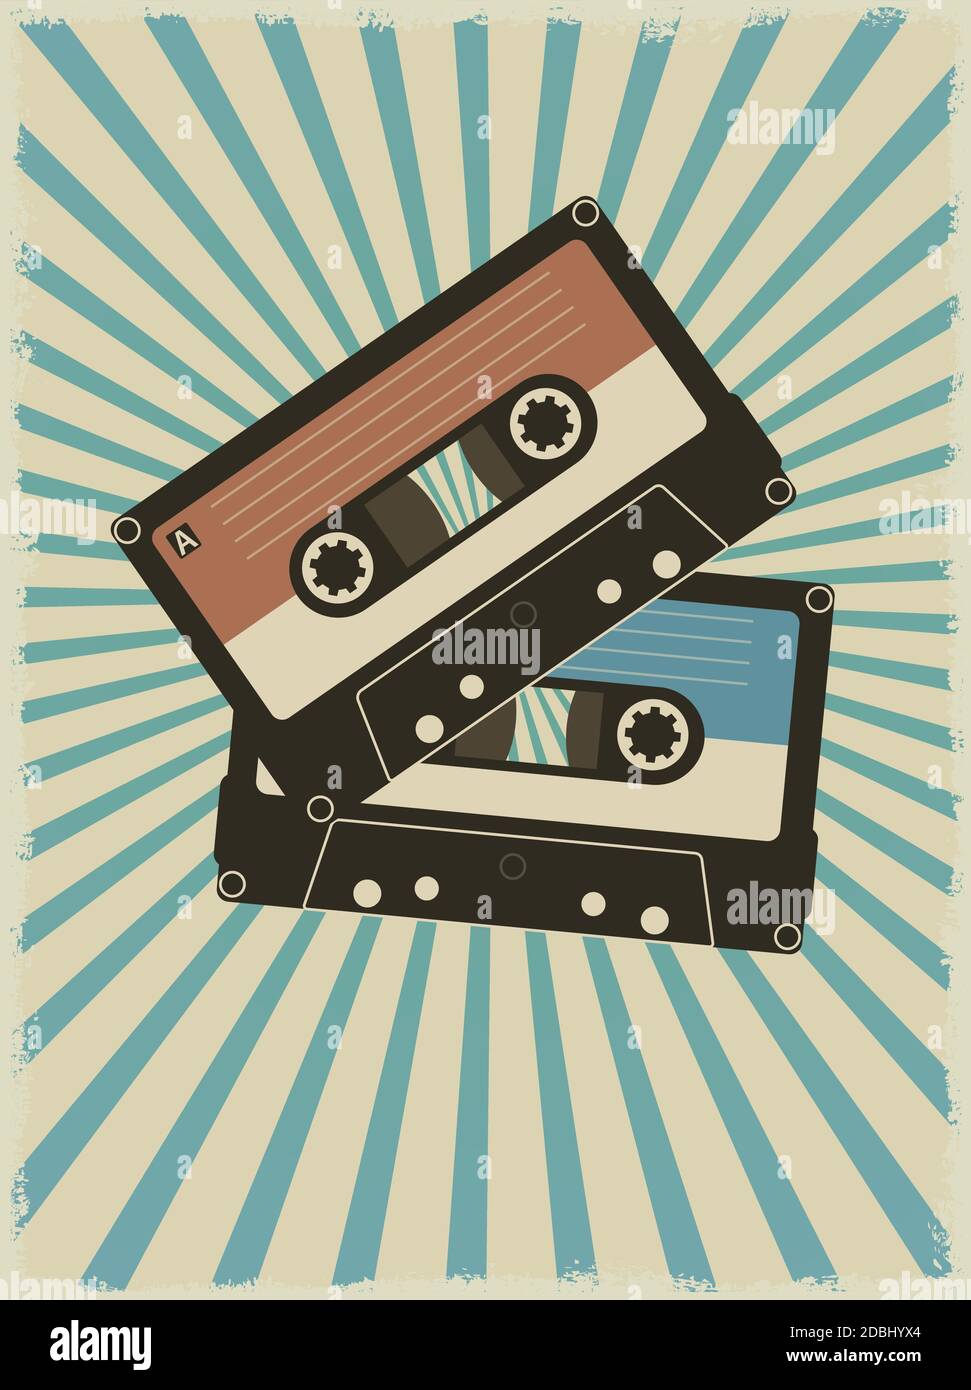 Vintage Plastic Tape Cassette. Audio Cassette Tape With Text - Old School.  Retro Technological, Realistic Design. Illustration Isolated On White  Background. Royalty Free SVG, Cliparts, Vectors, and Stock Illustration.  Image 58037719.